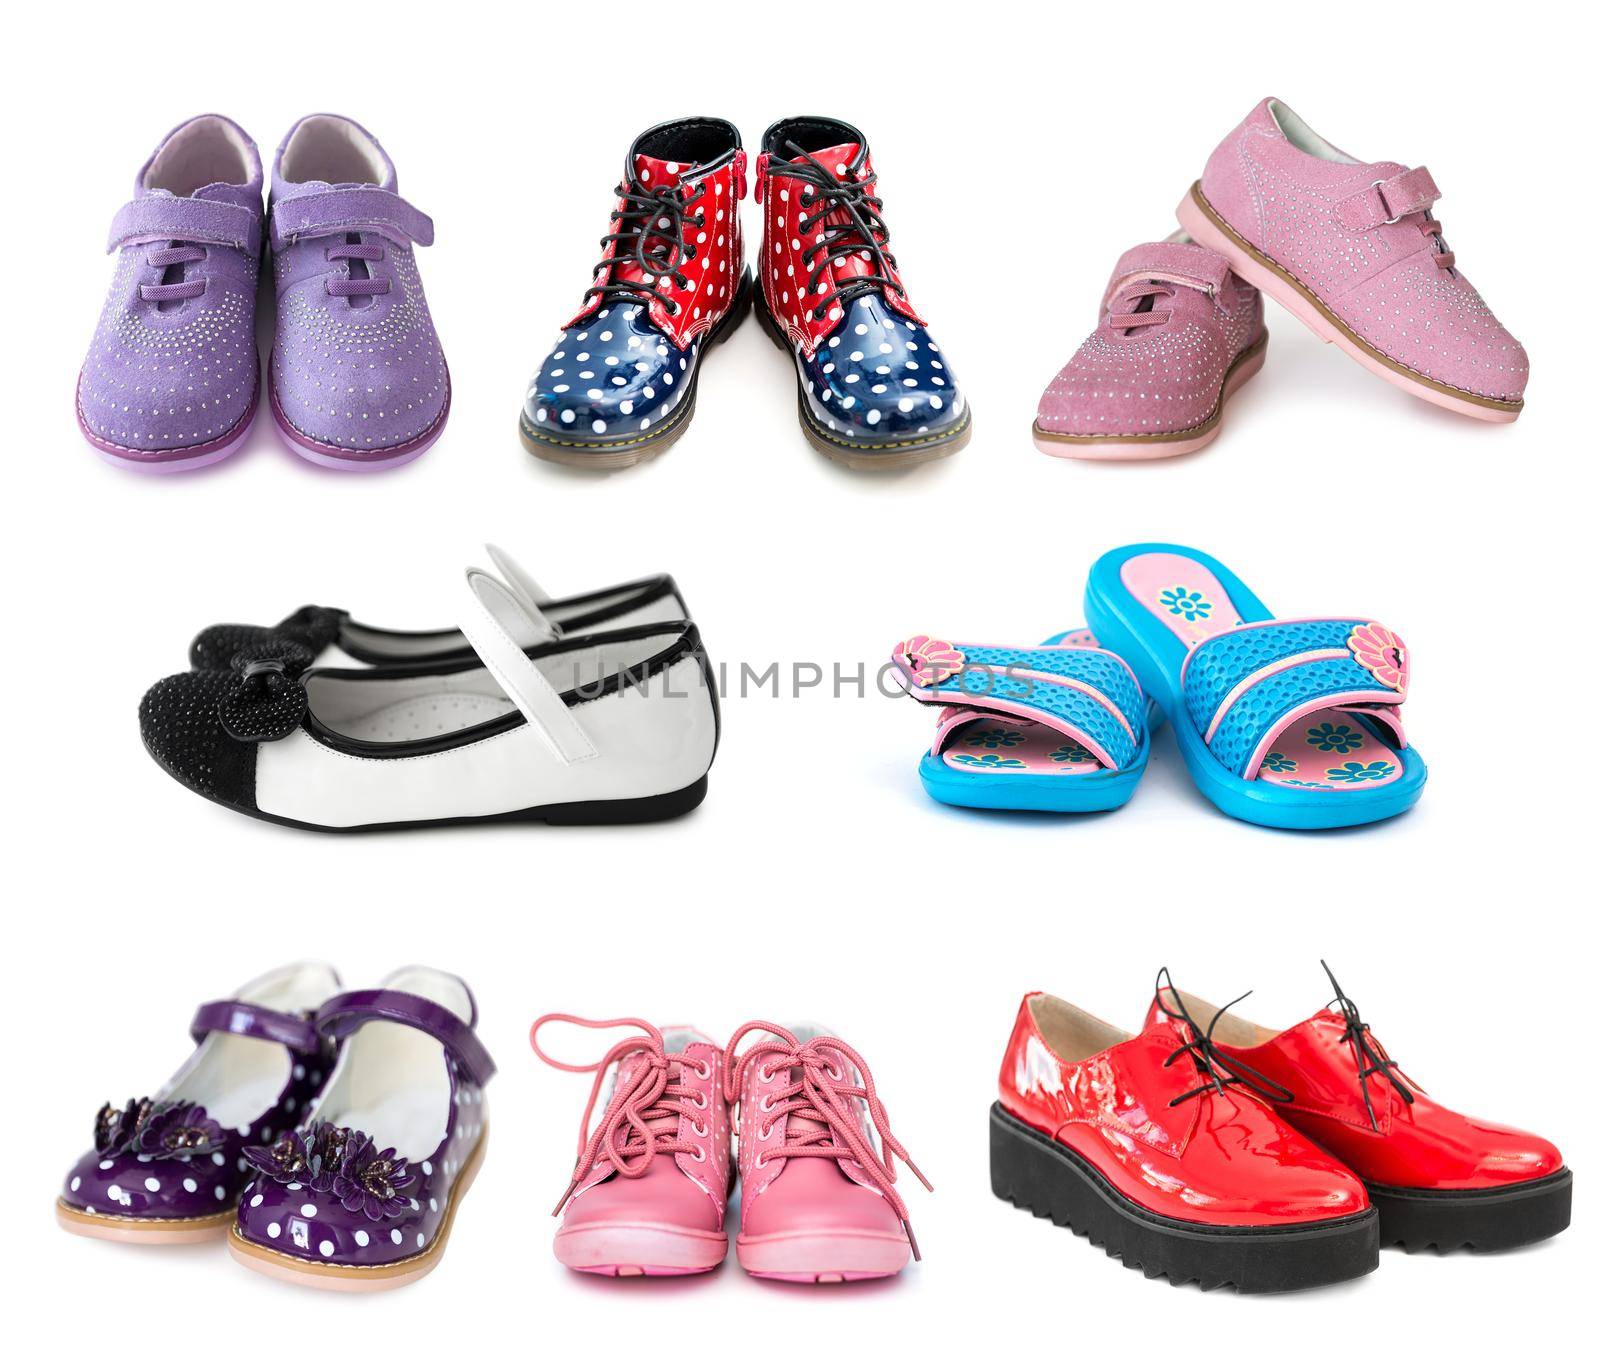 collage of different kids shoes isolated on white background